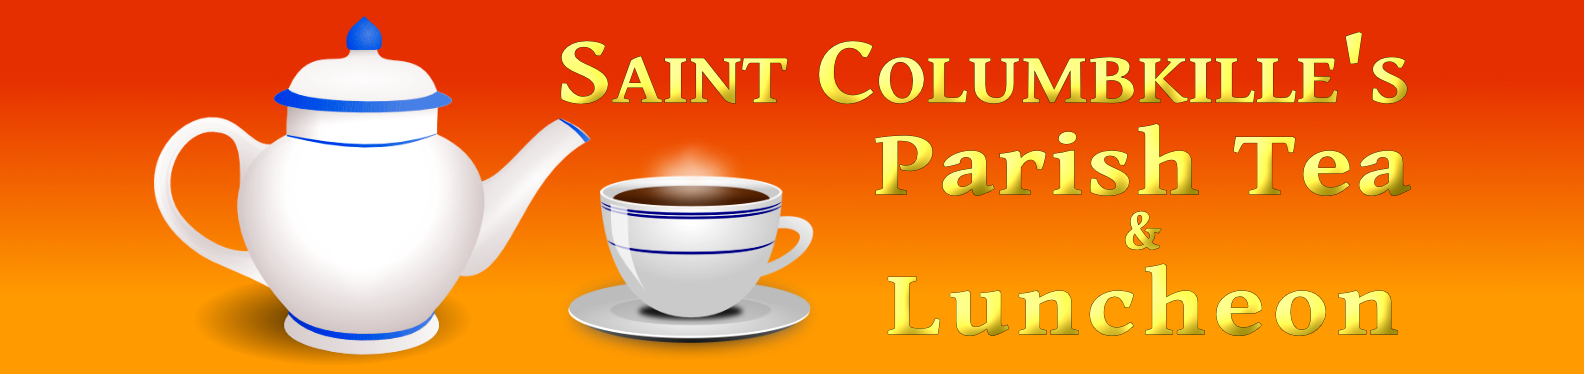 Saint Columkille Parish Tea and Luncheon showing a teapot and a cup of tea